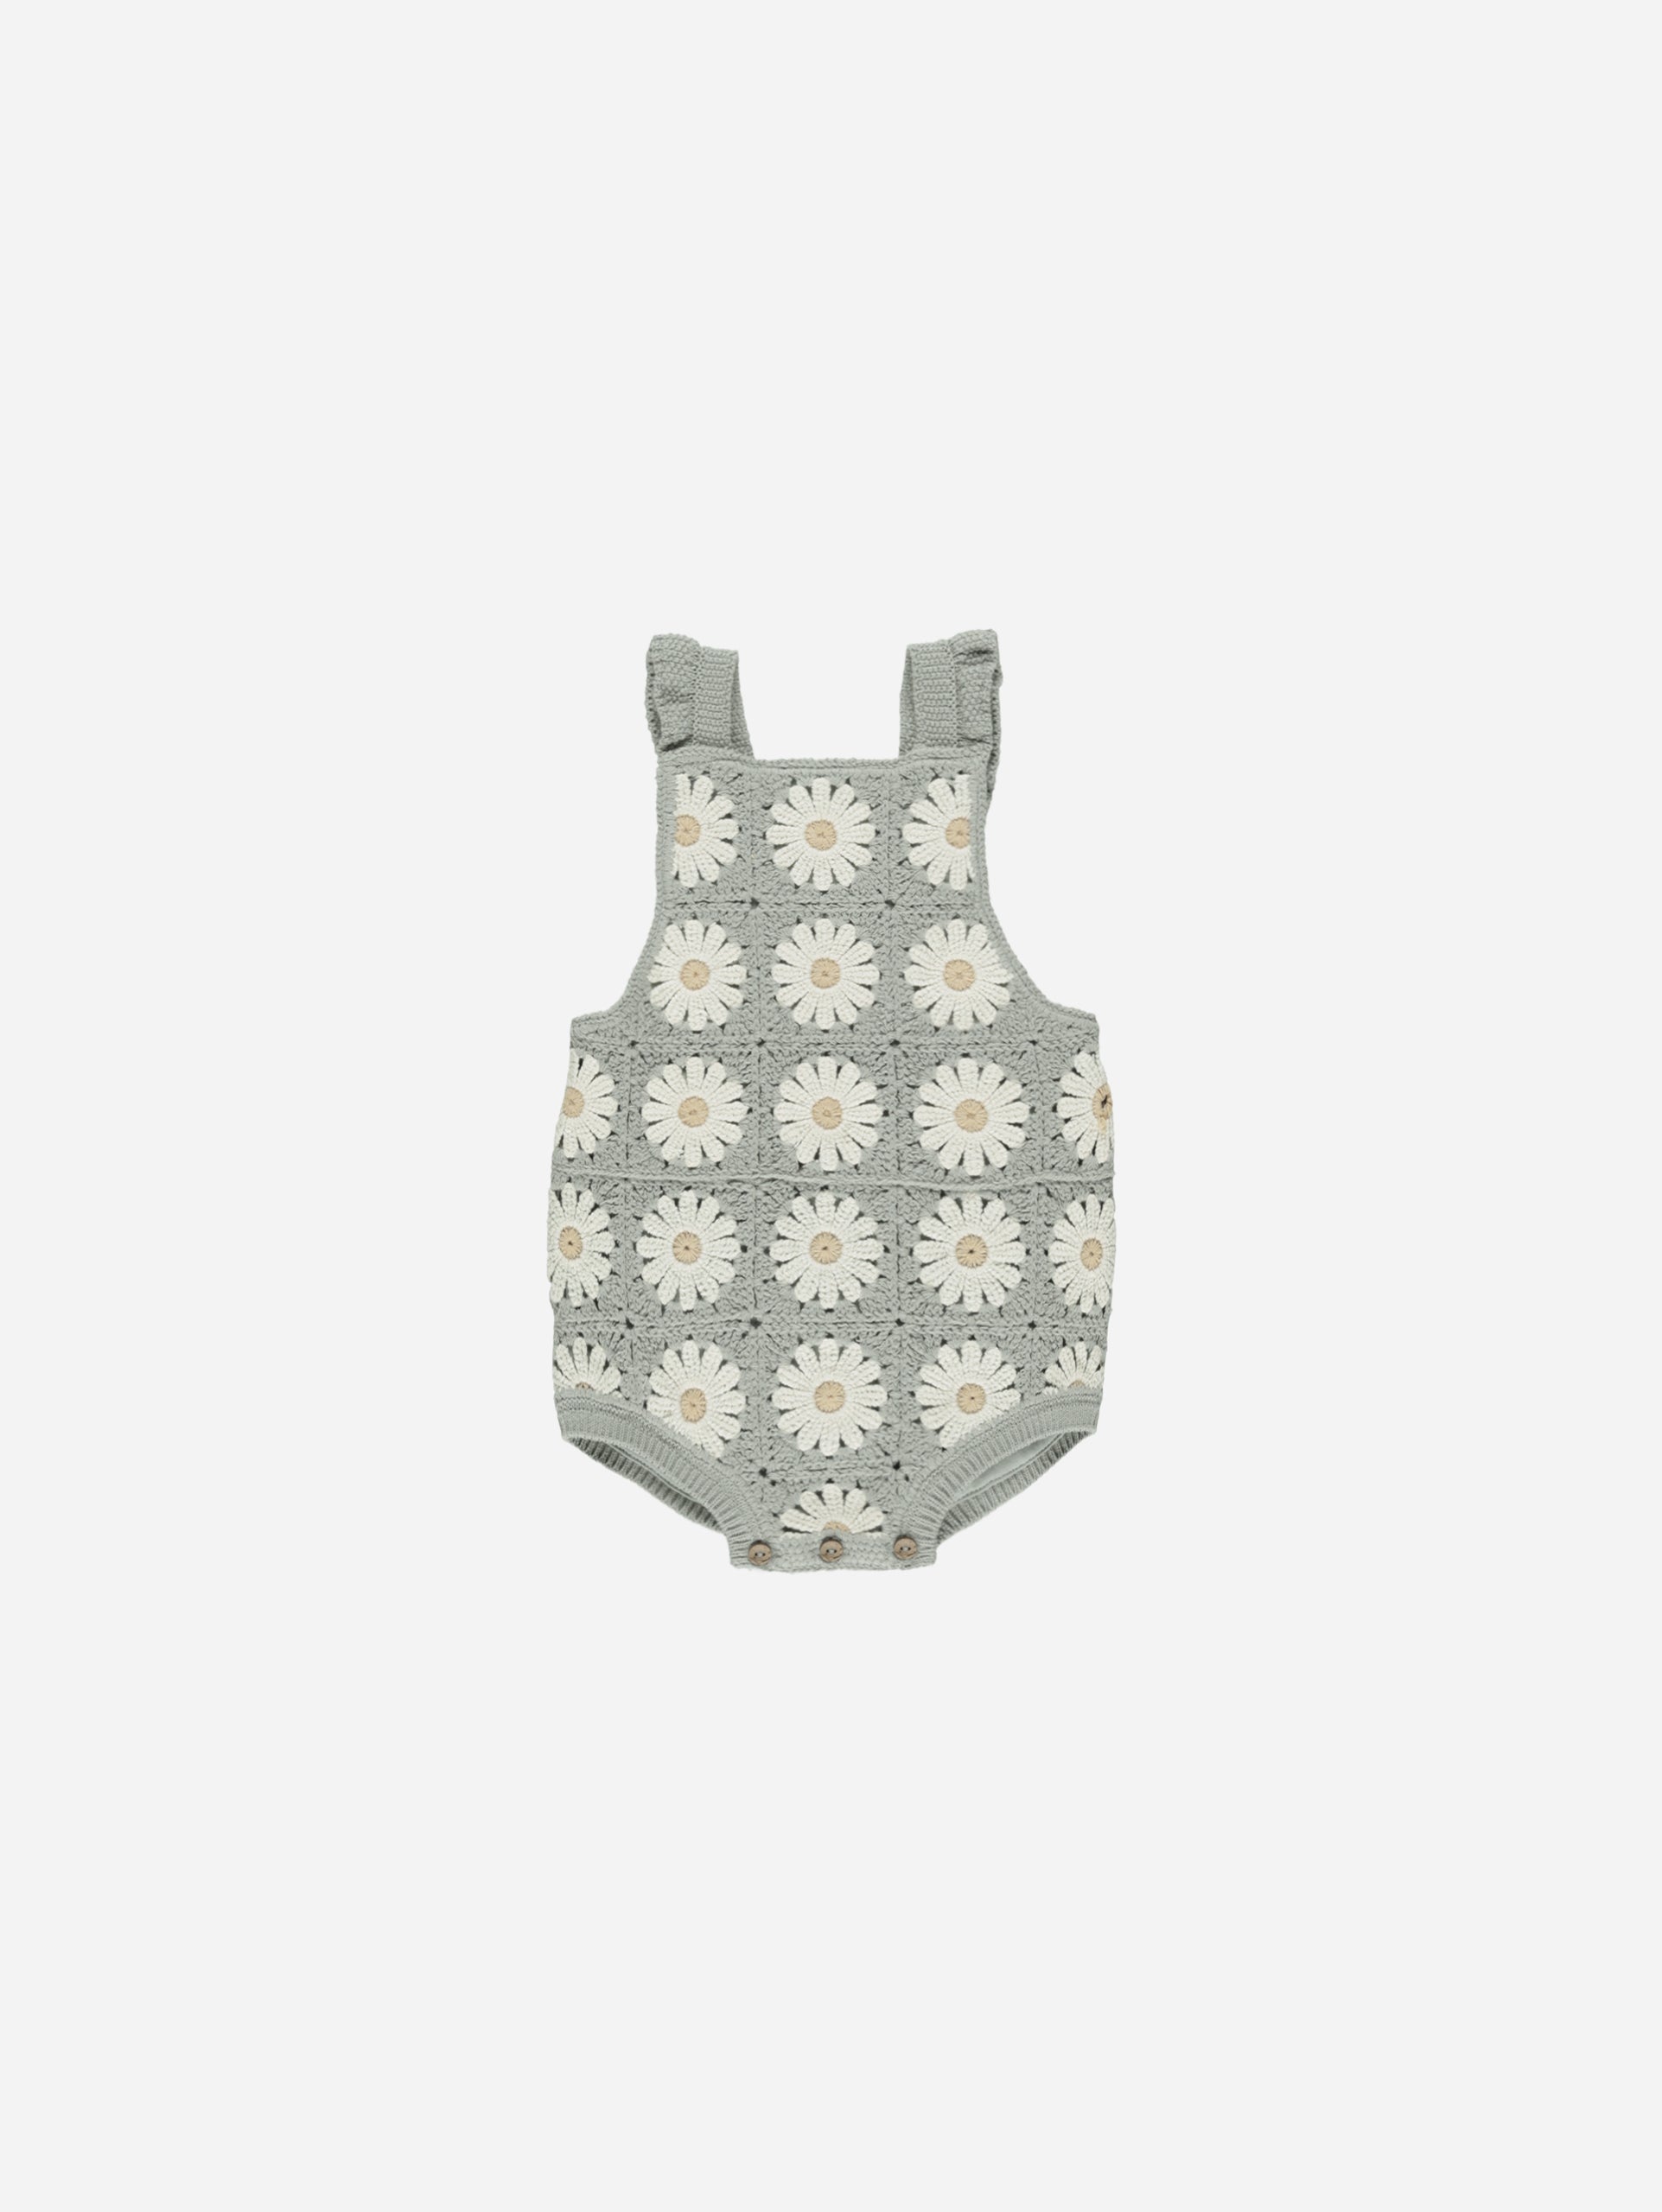 Crochet Romper || Daisy - Rylee + Cru | Kids Clothes | Trendy Baby Clothes | Modern Infant Outfits |